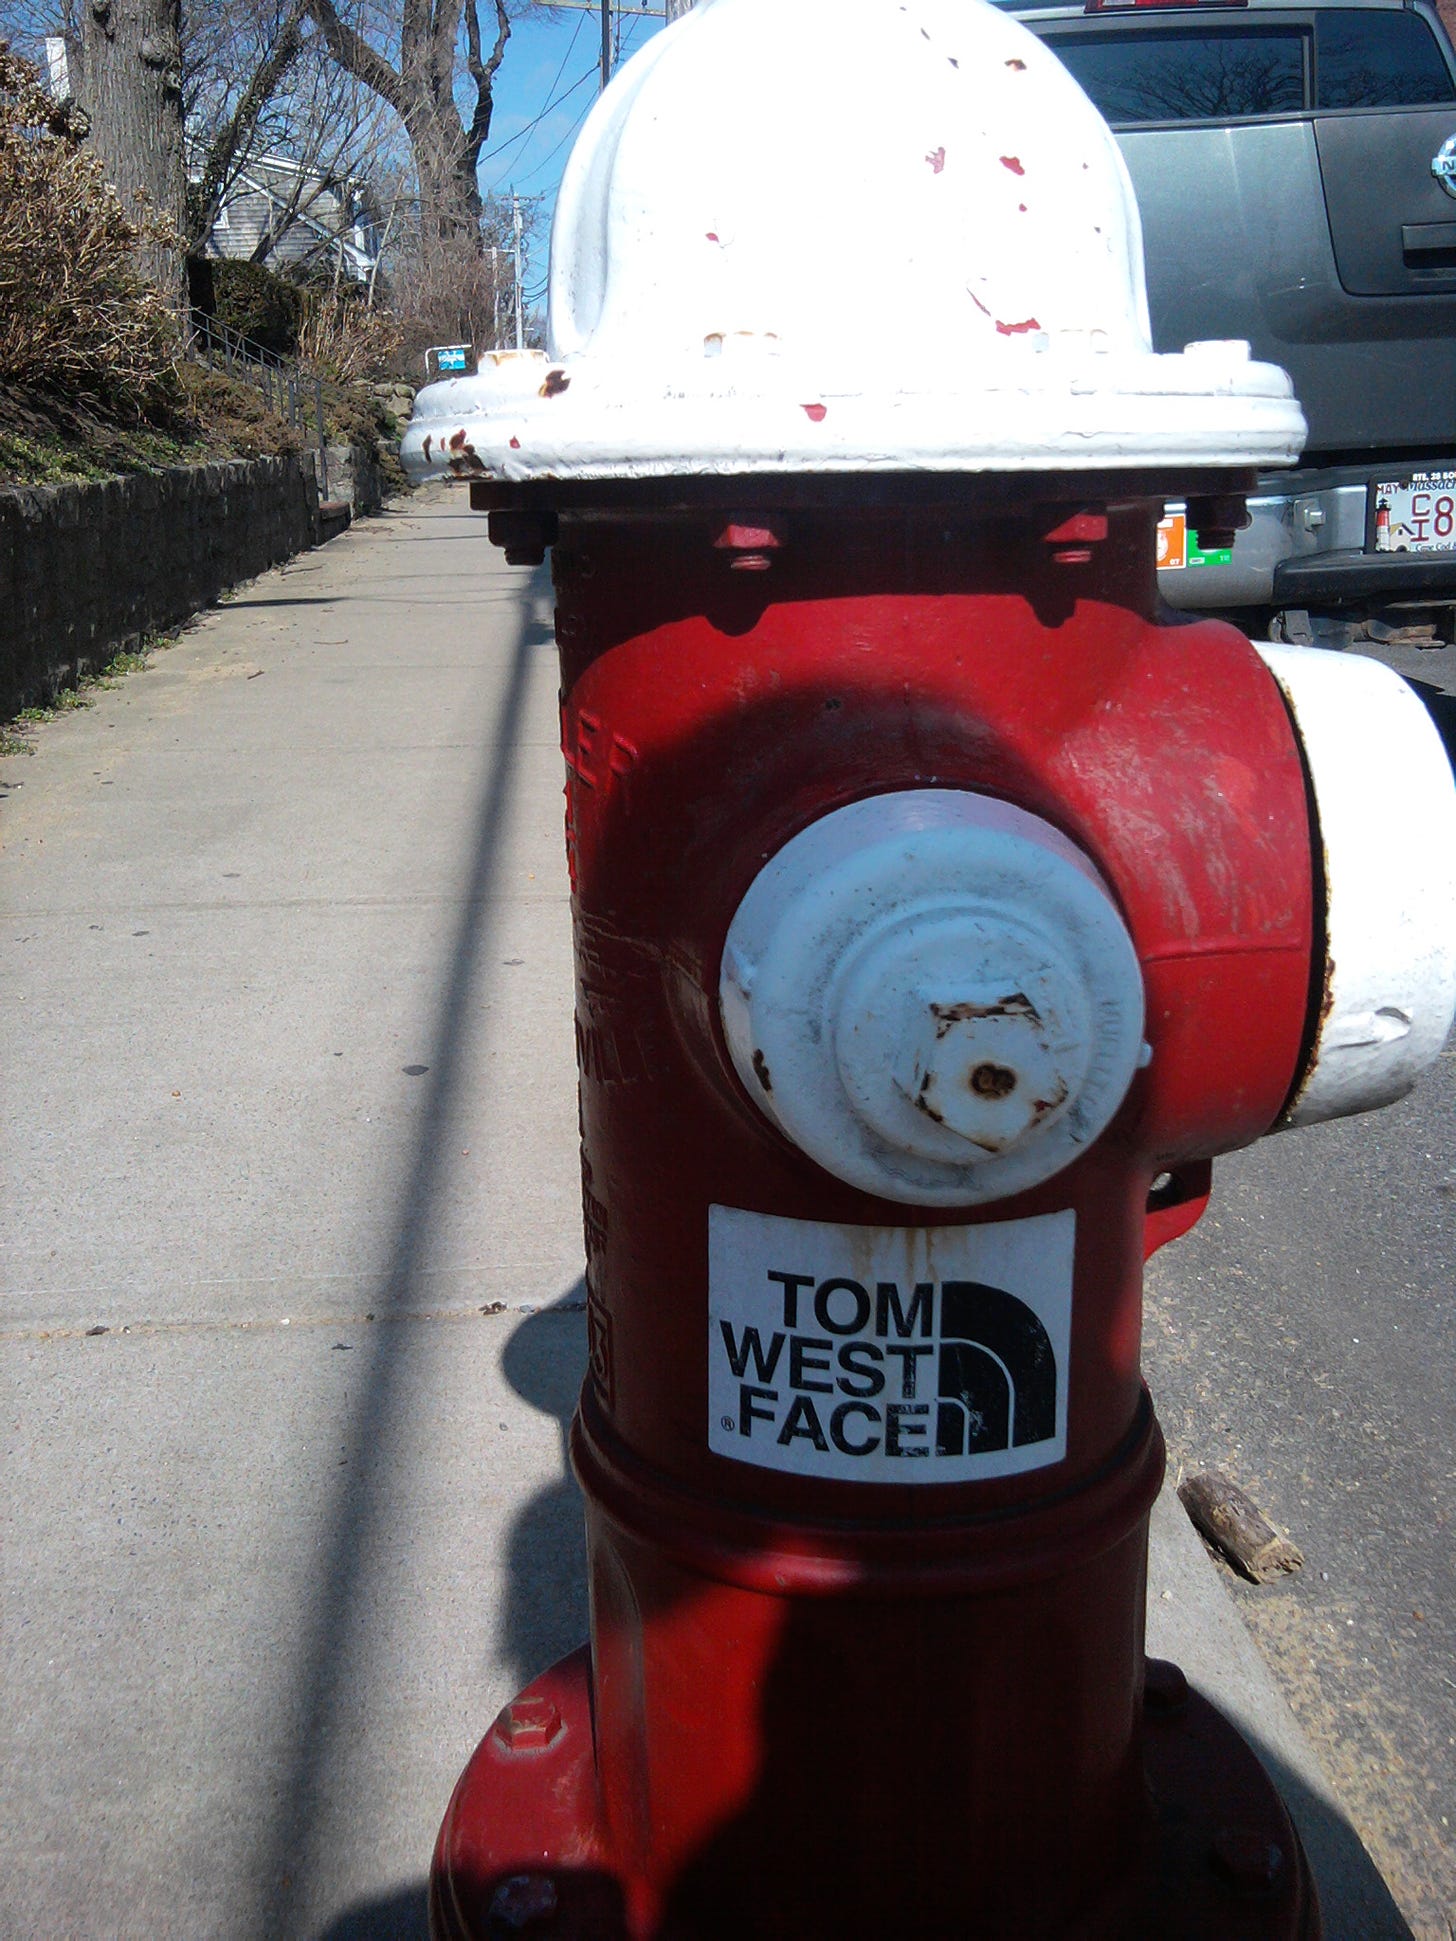 Photo of a fire hydrant with a sticker affixed to it. It looks like the North Face logo in black and white, but instead of "North Face" it says "Tom West Face"